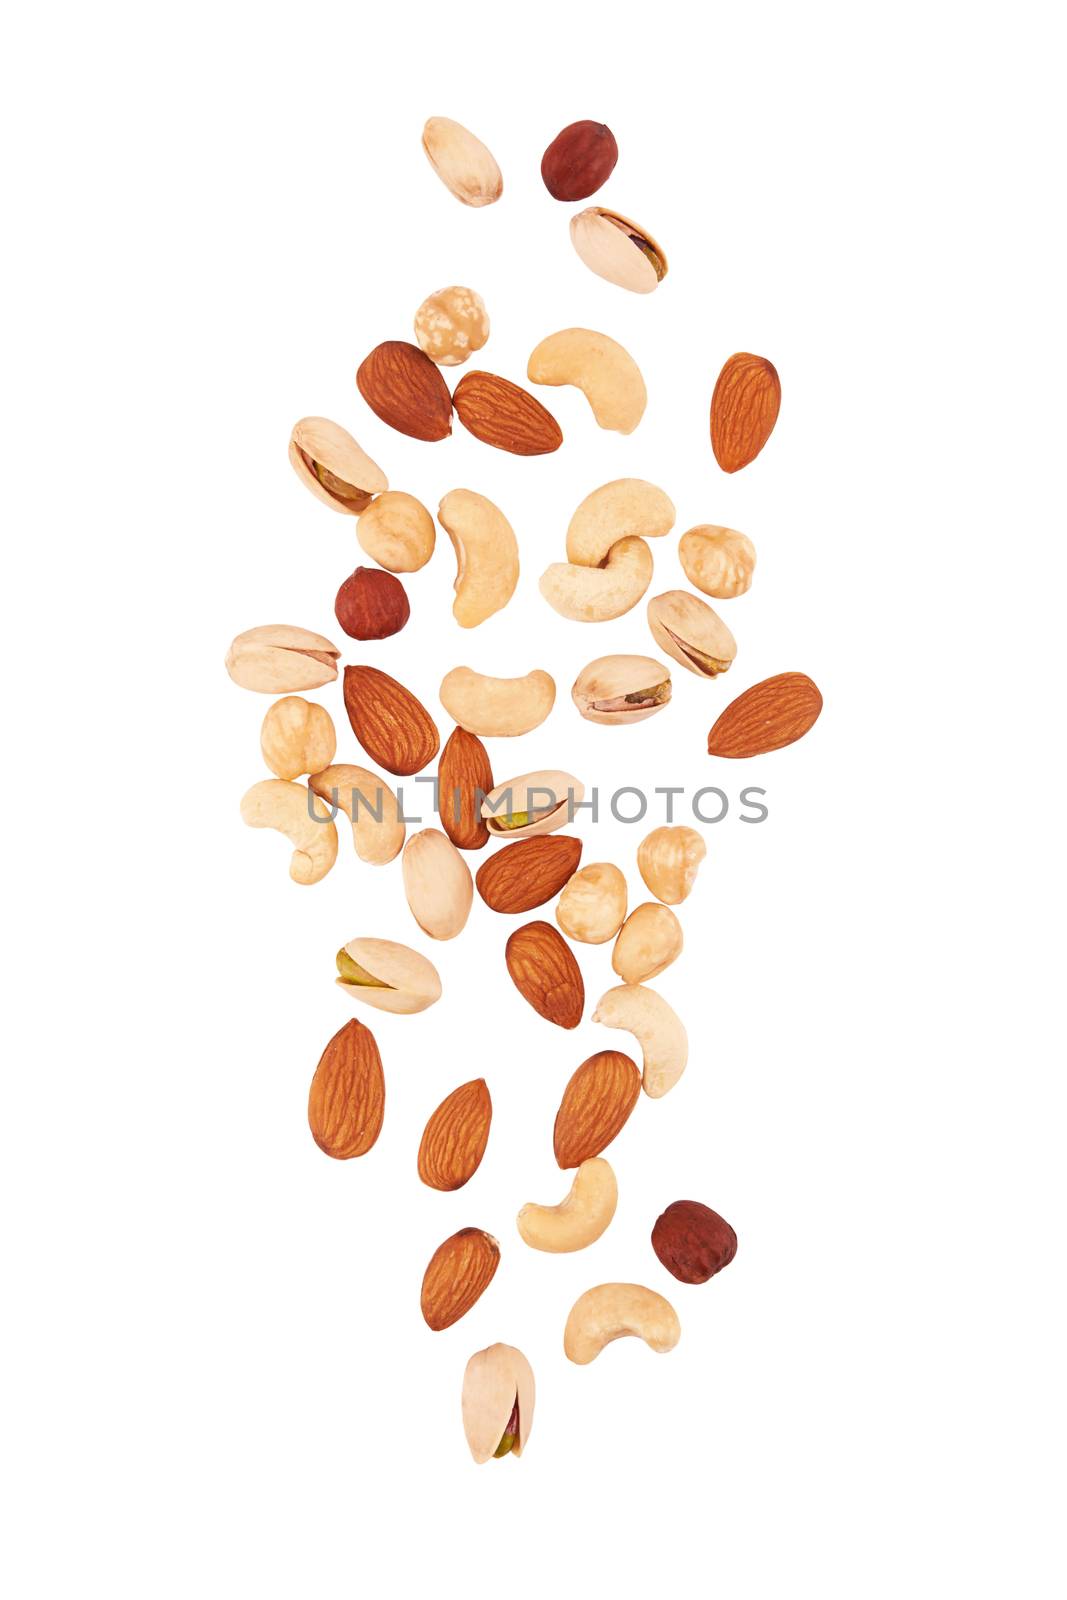 Heap of mixed nuts isolated on white background